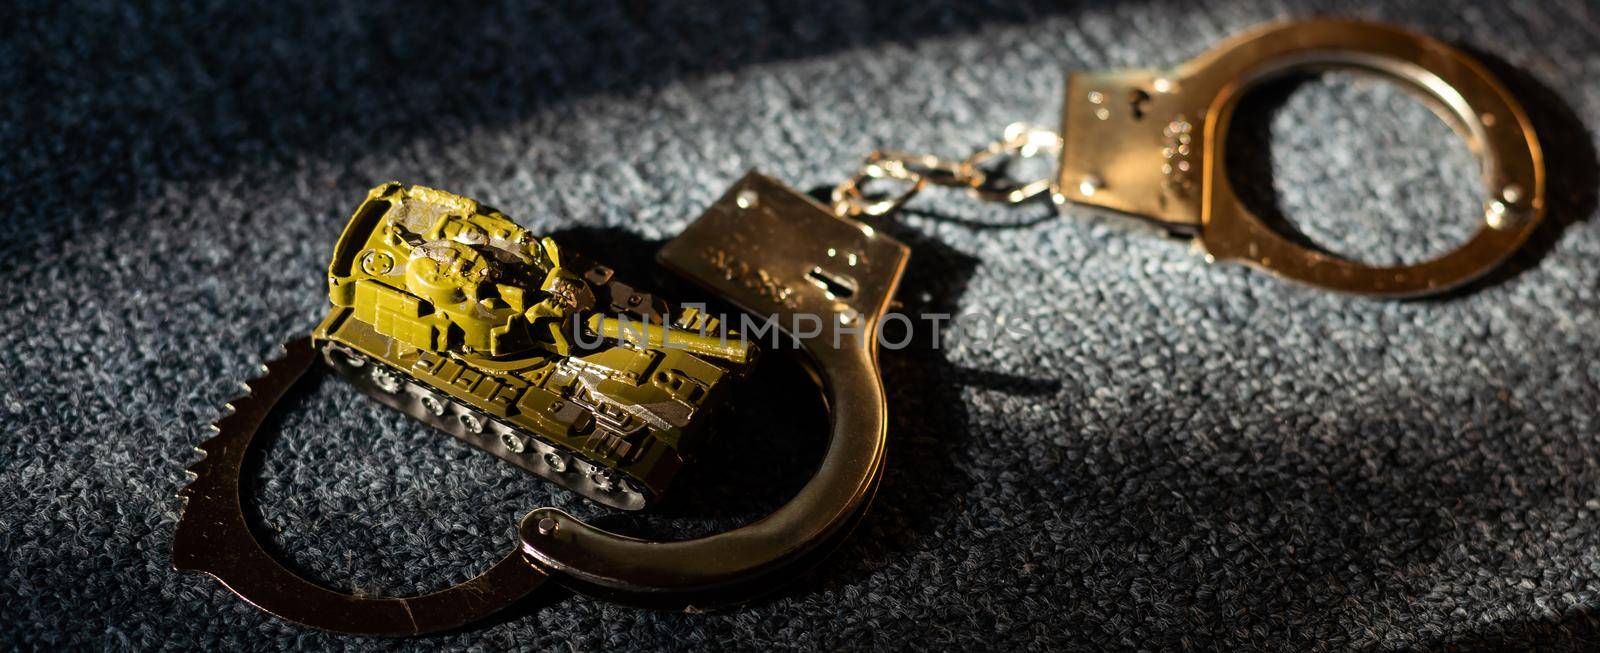 toy tank and handcuffs on a dark background.